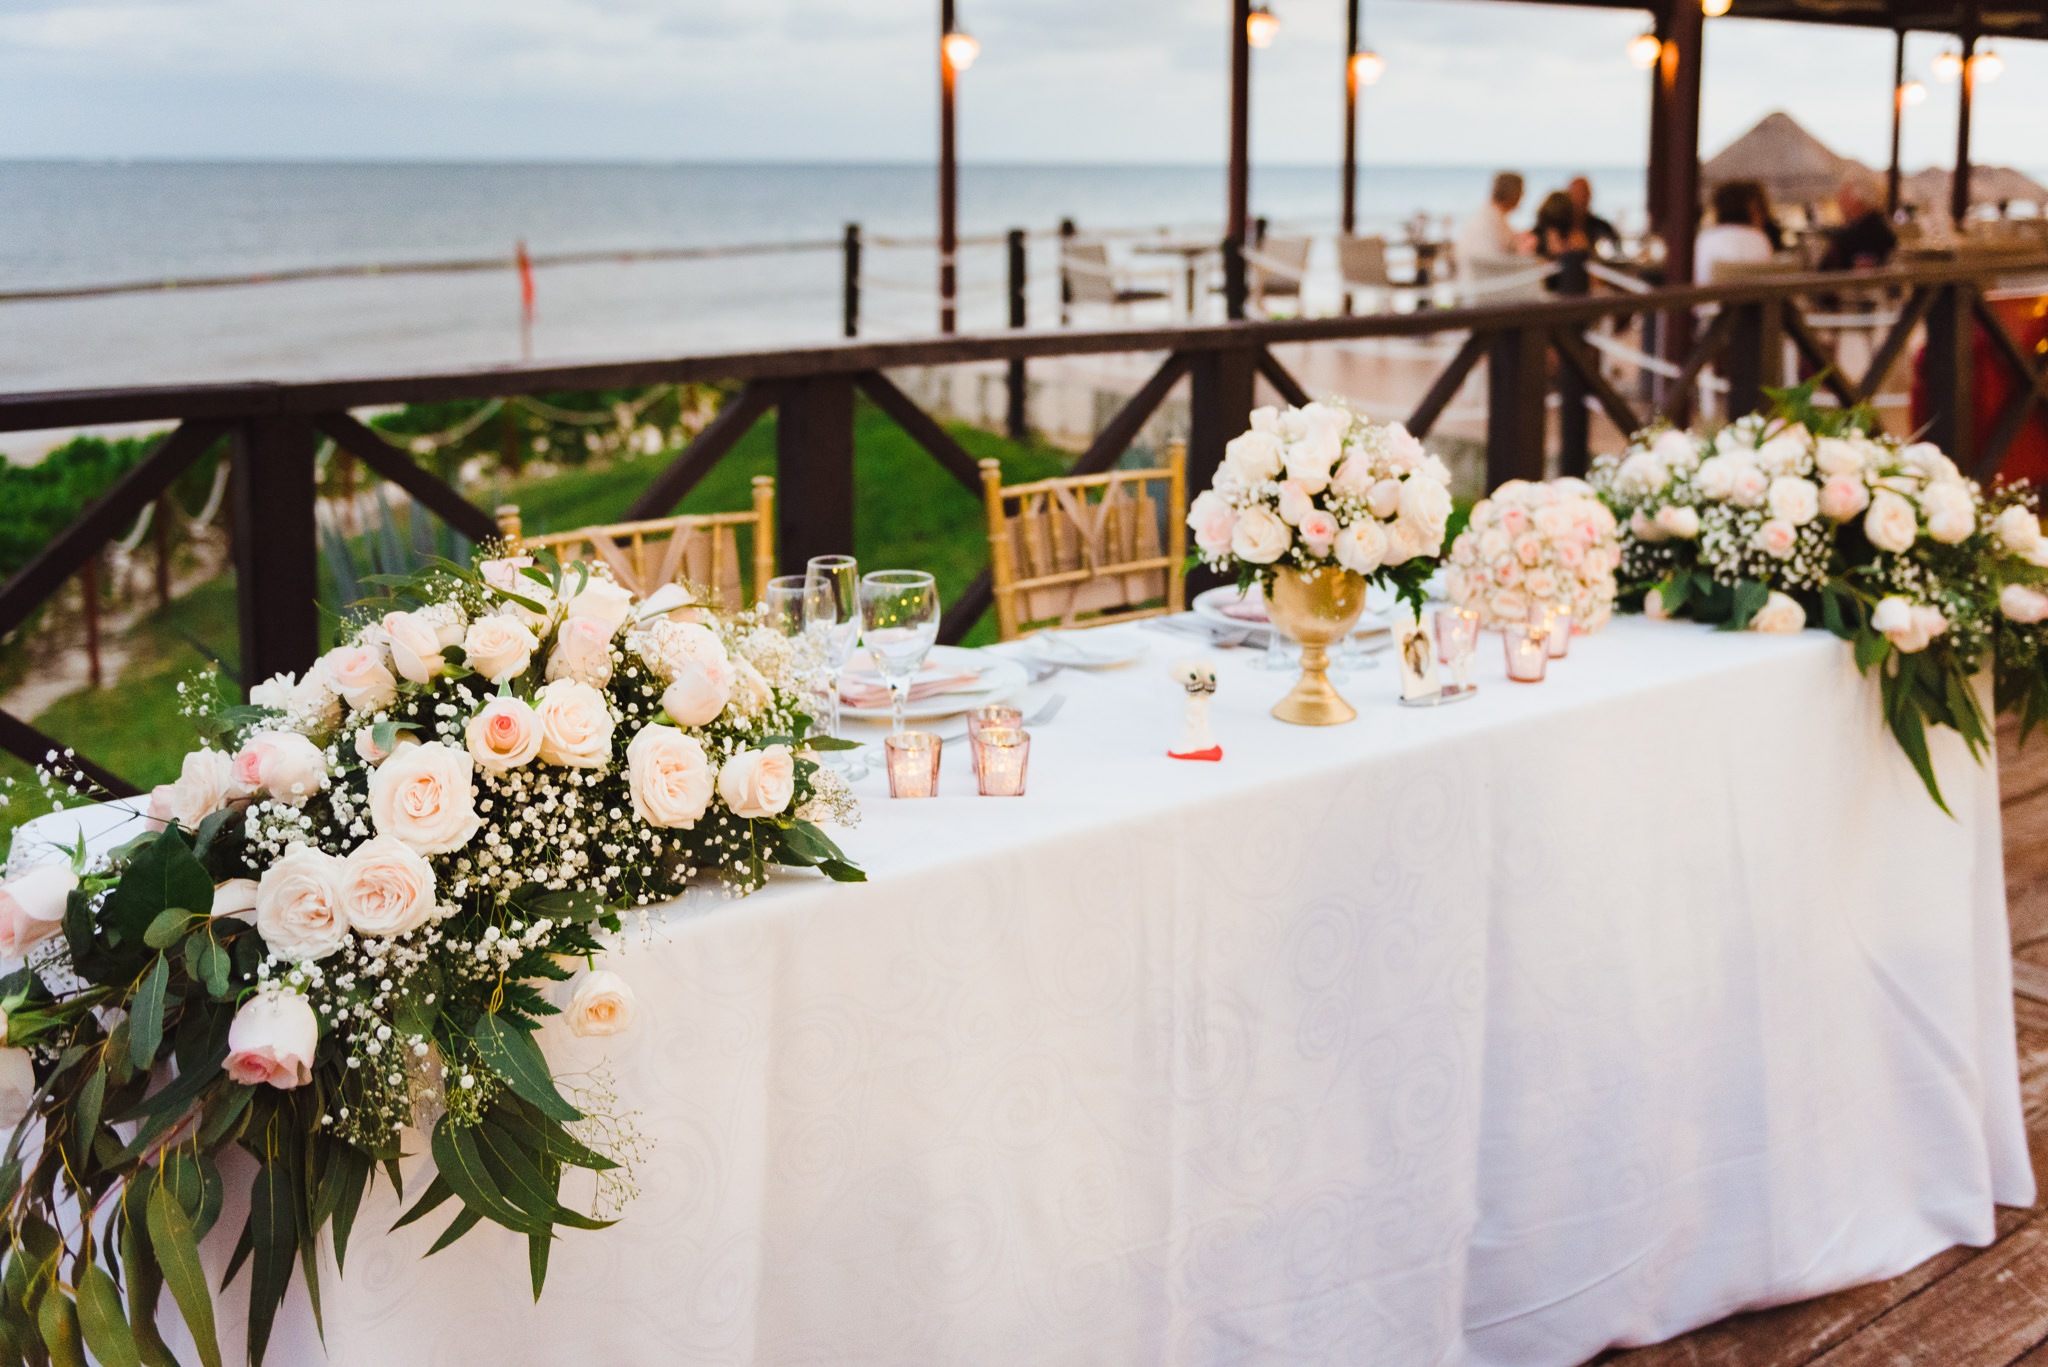 head table for wedding reception at the Now Sapphire Resort in Mexico